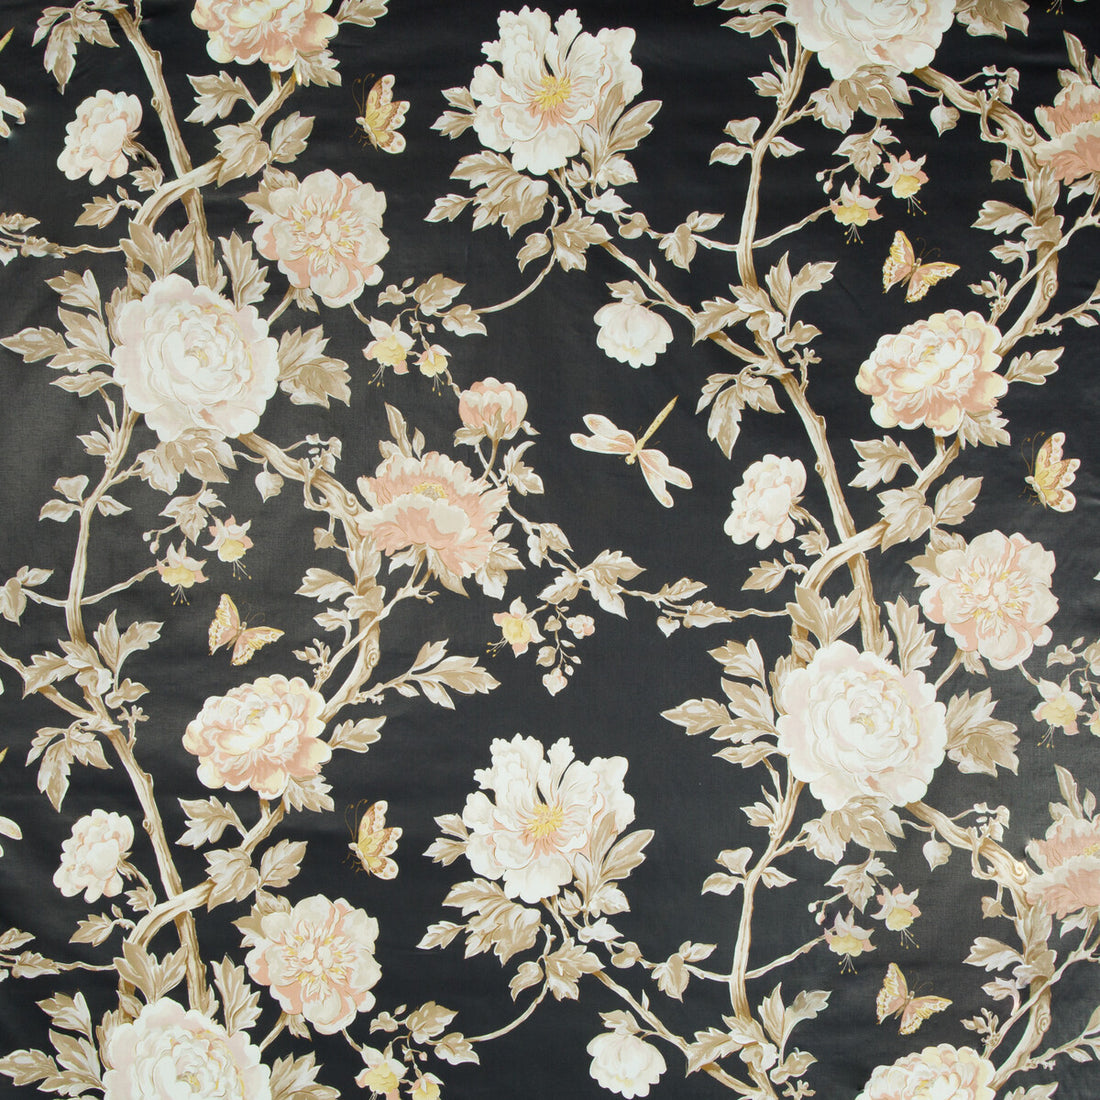 Les Pivoines Print fabric in petal color - pattern 8017135.119.0 - by Brunschwig &amp; Fils in the Les Ensembliers collection